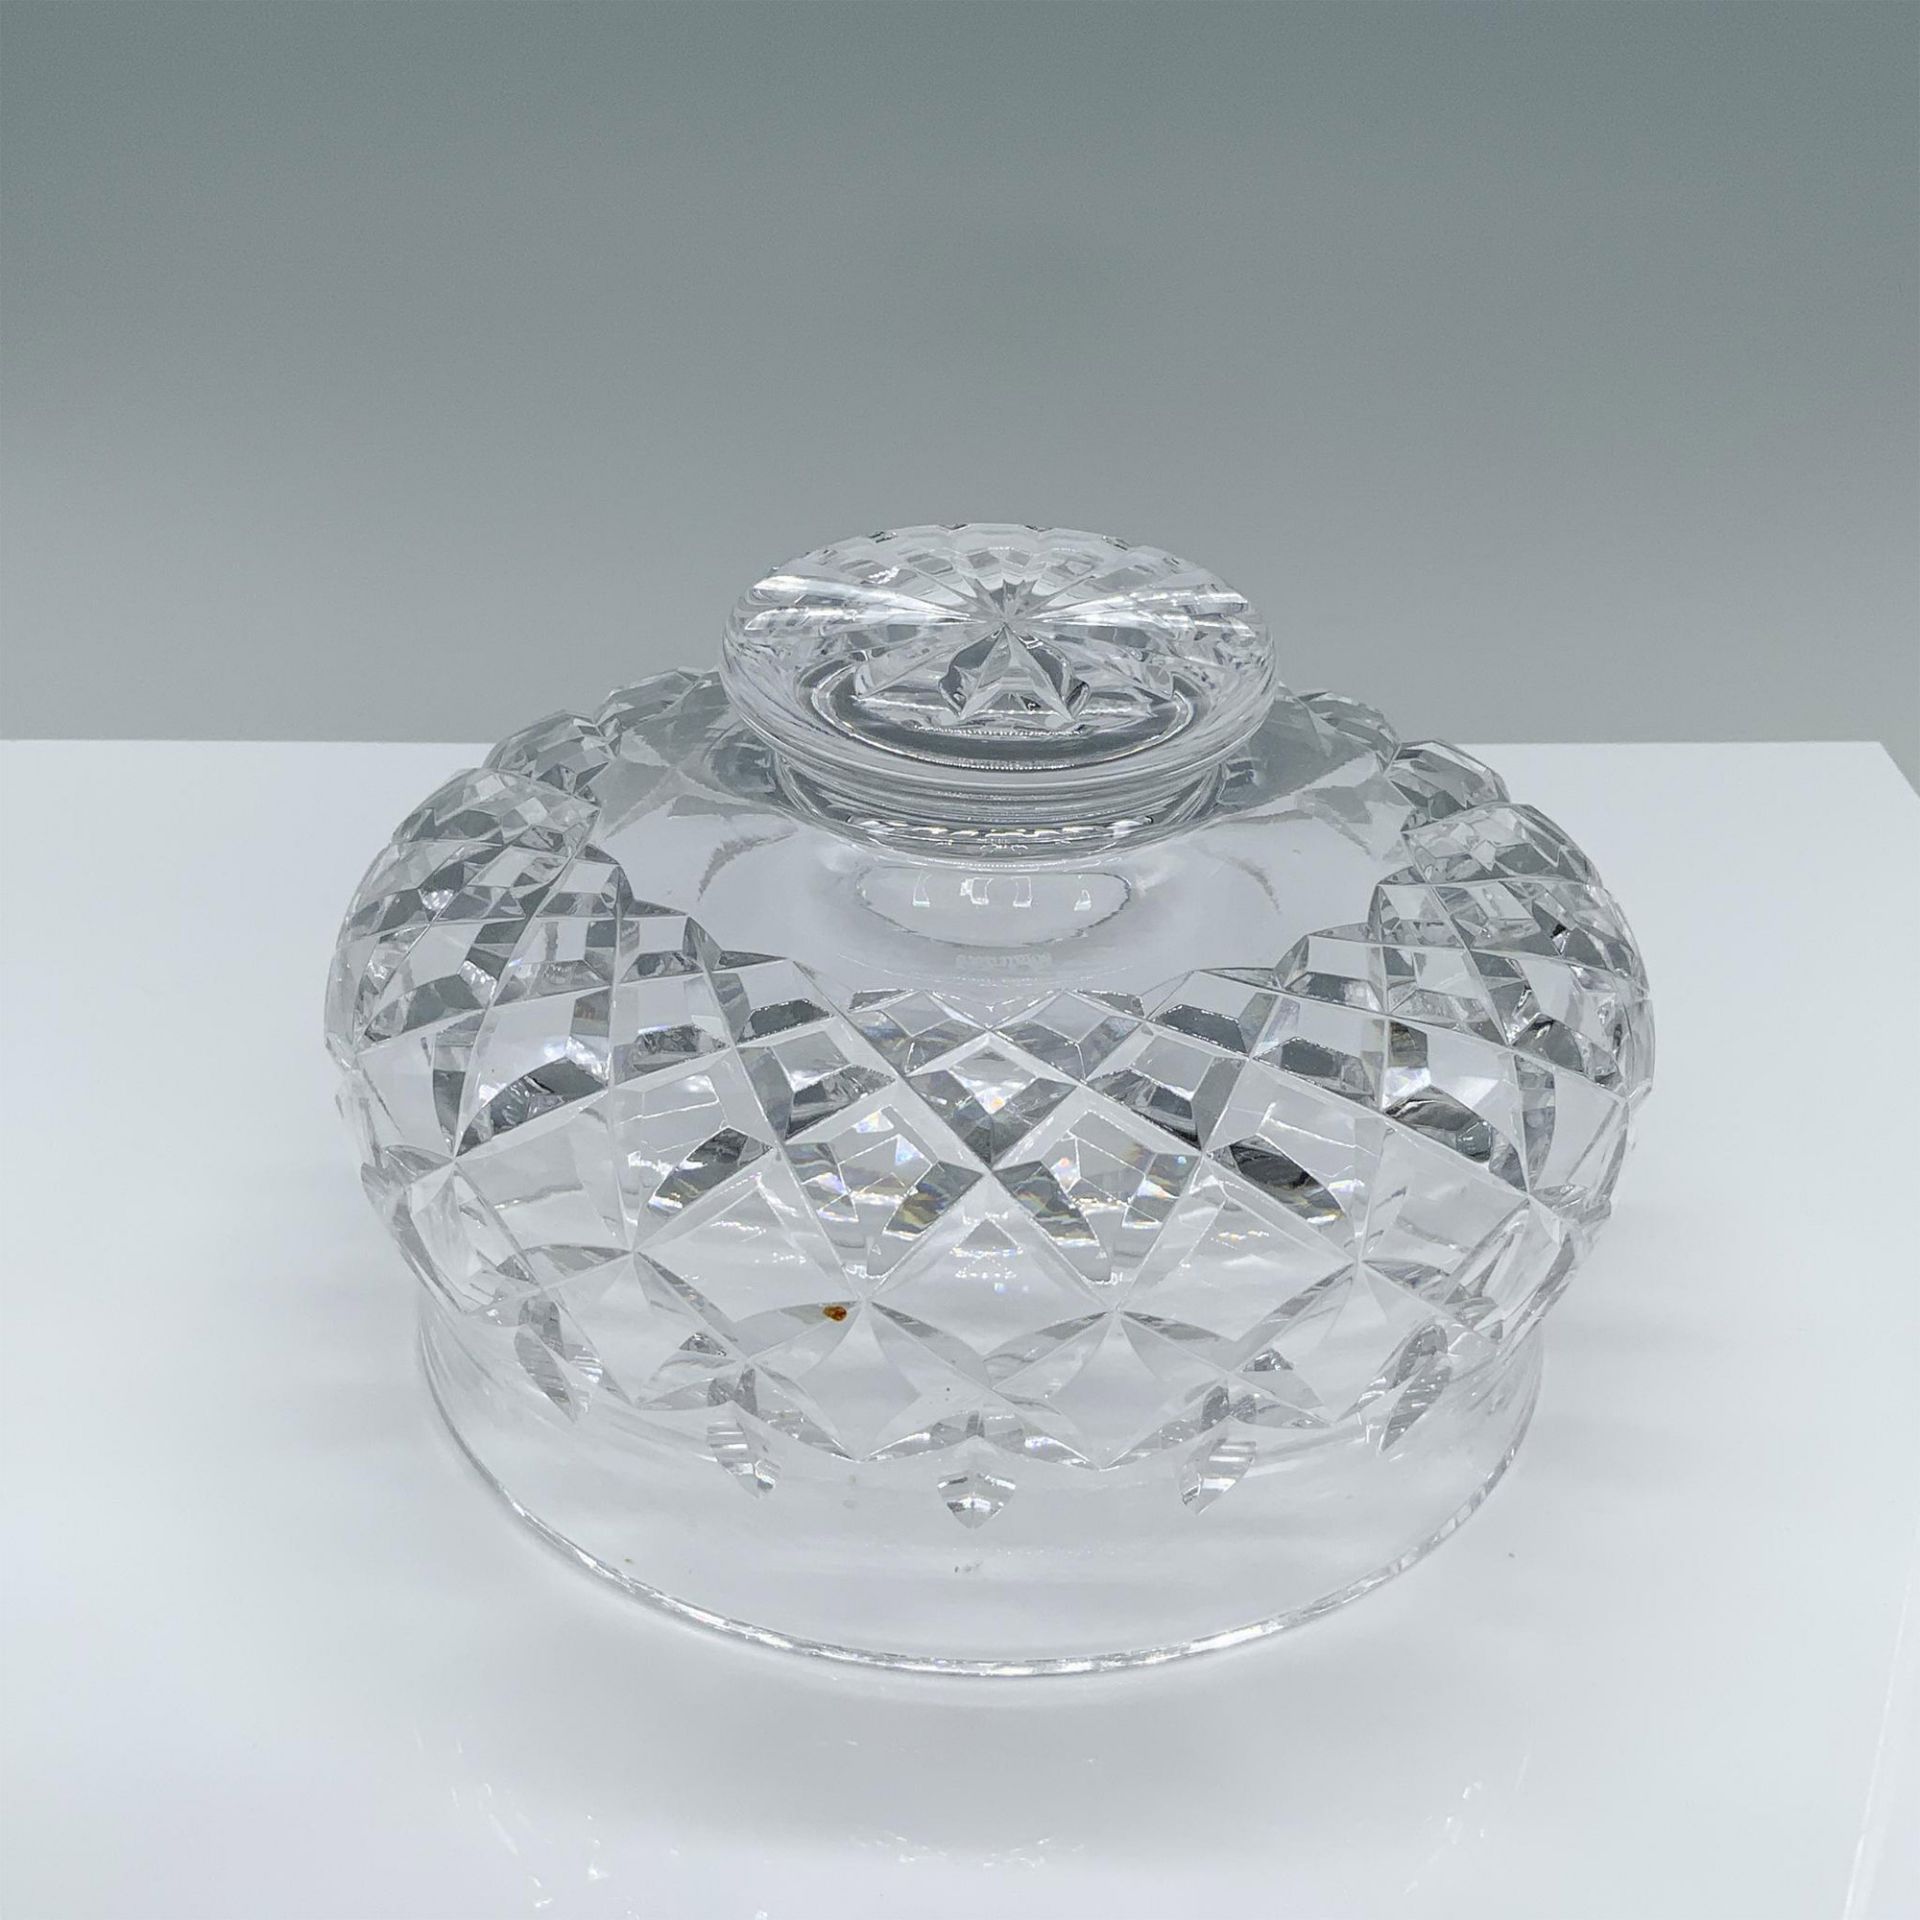 Waterford Crystal Footed Bowl, Lismore - Image 3 of 4